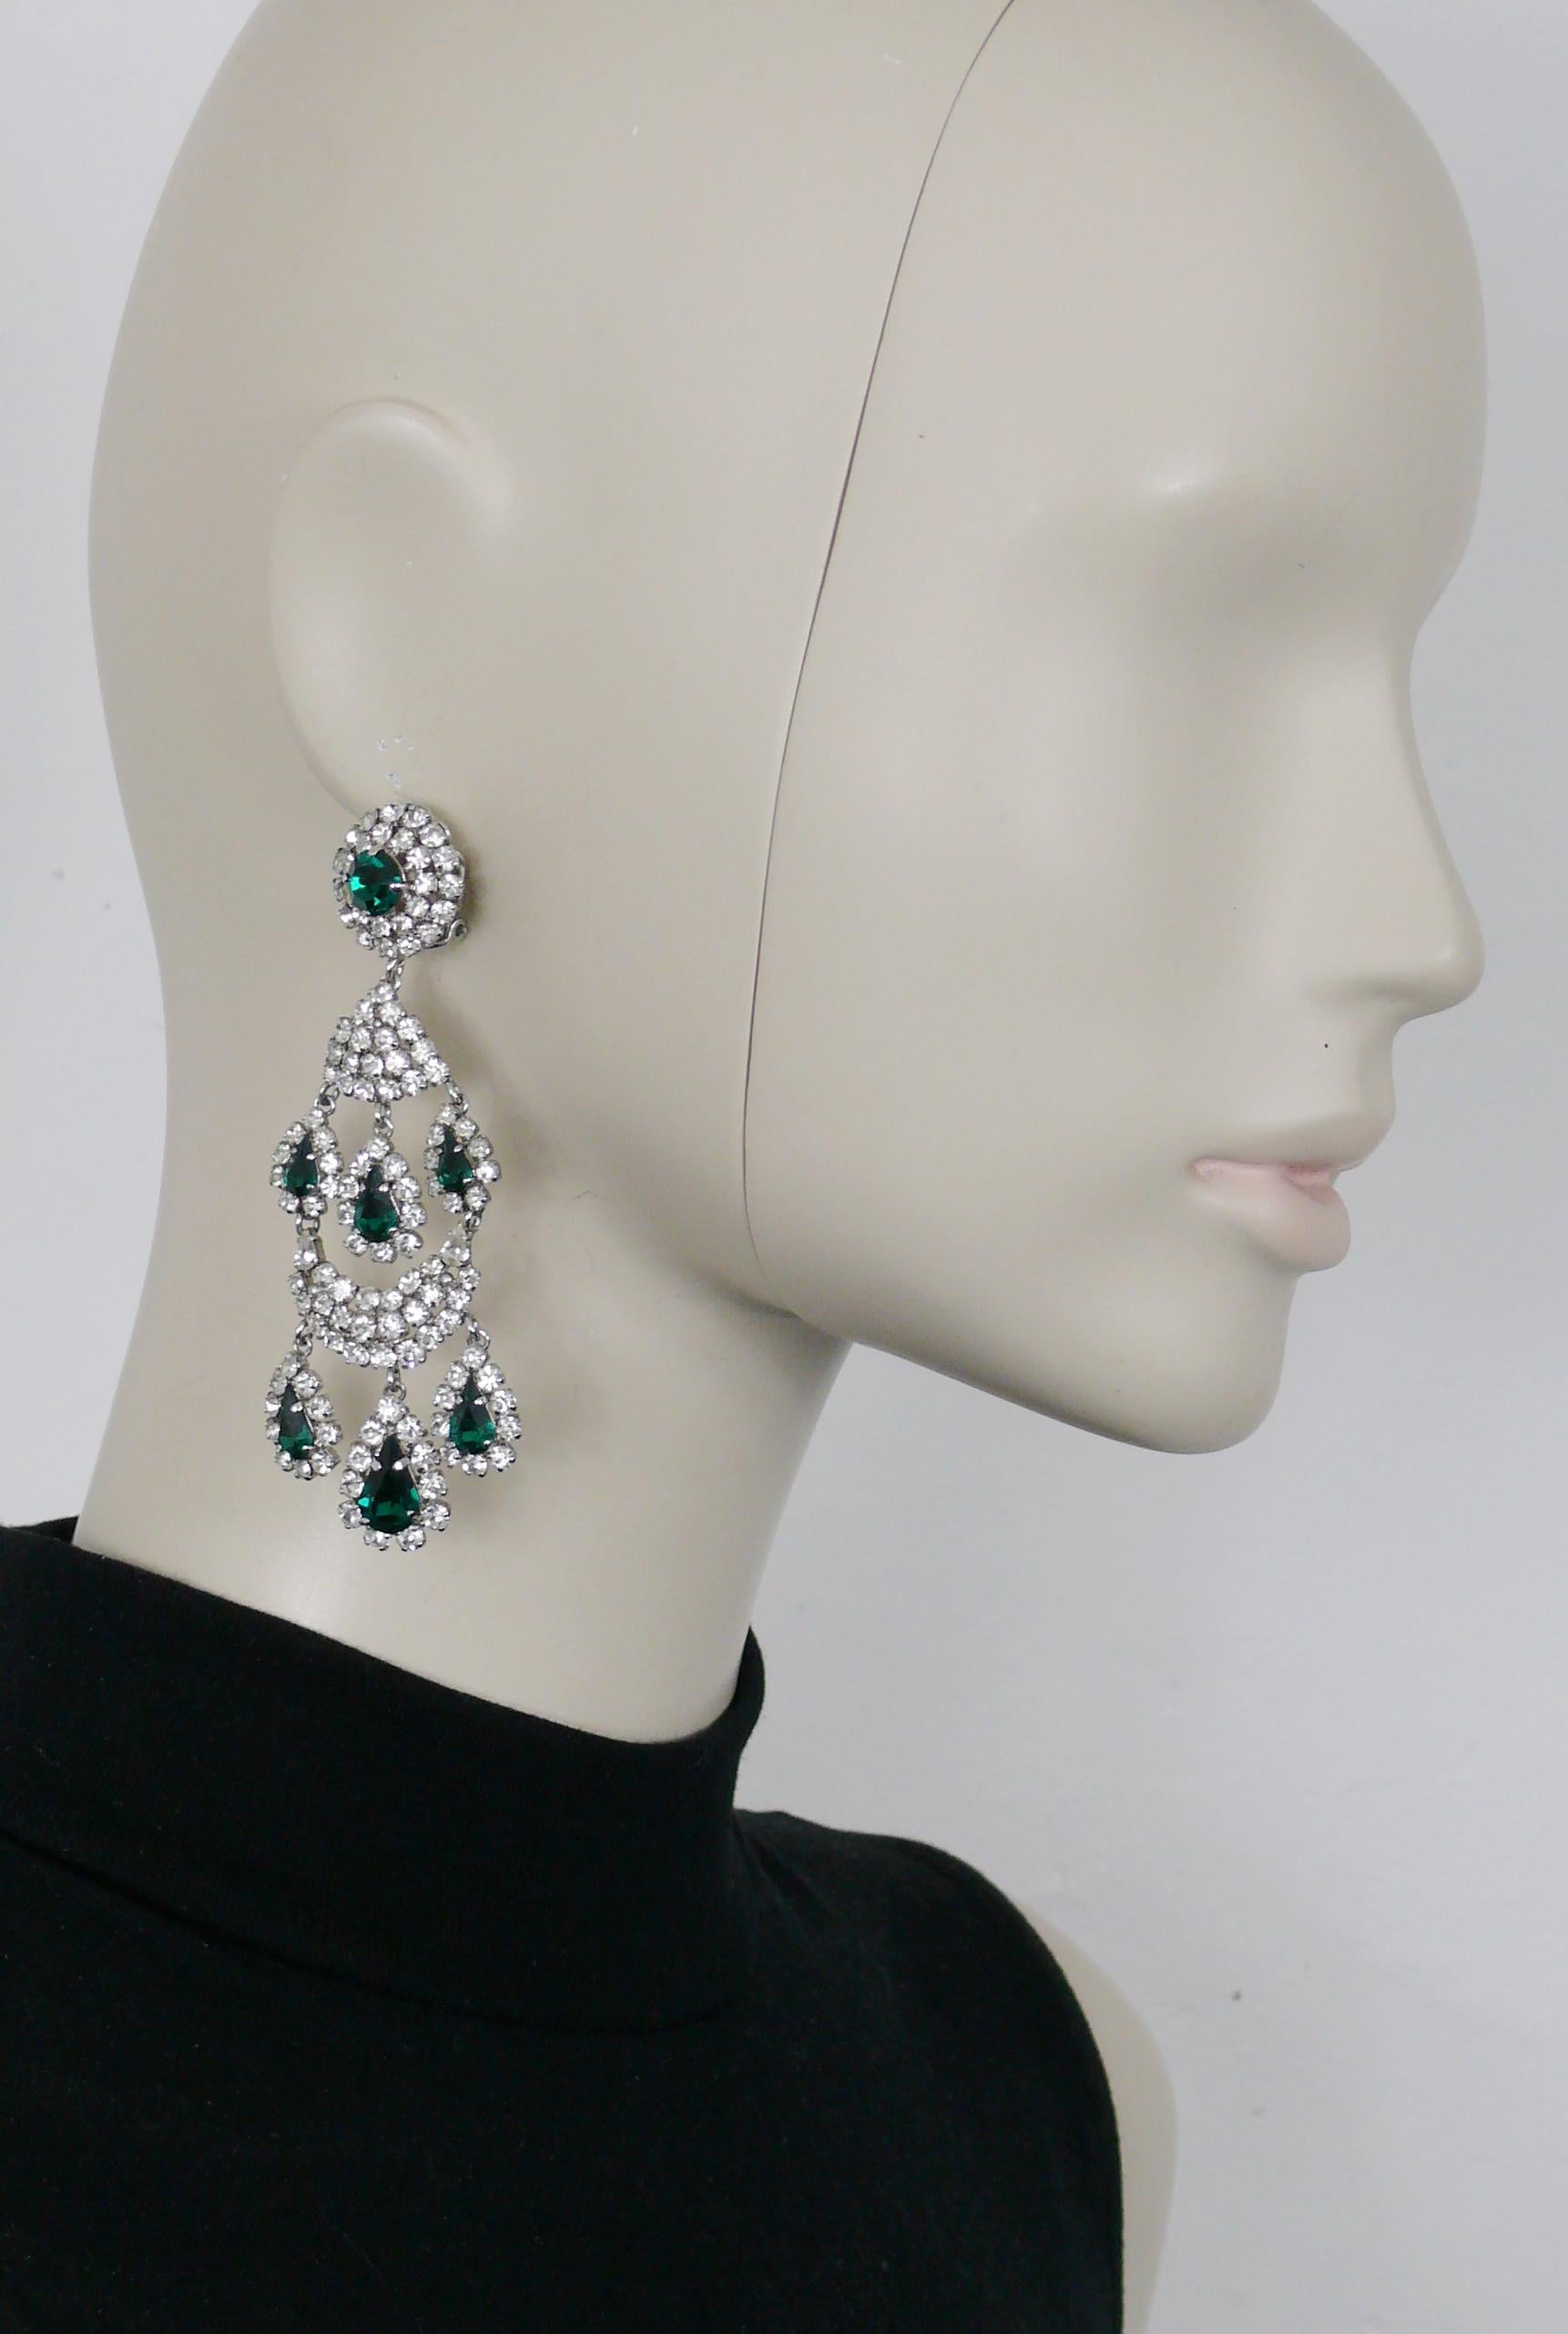 CHRISTIAN DIOR vintage silver toned chandelier earrings (clip-on) embellished with clear and emerald green crystals.

Marked CHR. DIOR © 1968 Germany.

Indicative measurements : height approx. 9.3 cm (3.66 inches) / max. width approx. 3.2 cm (1.26